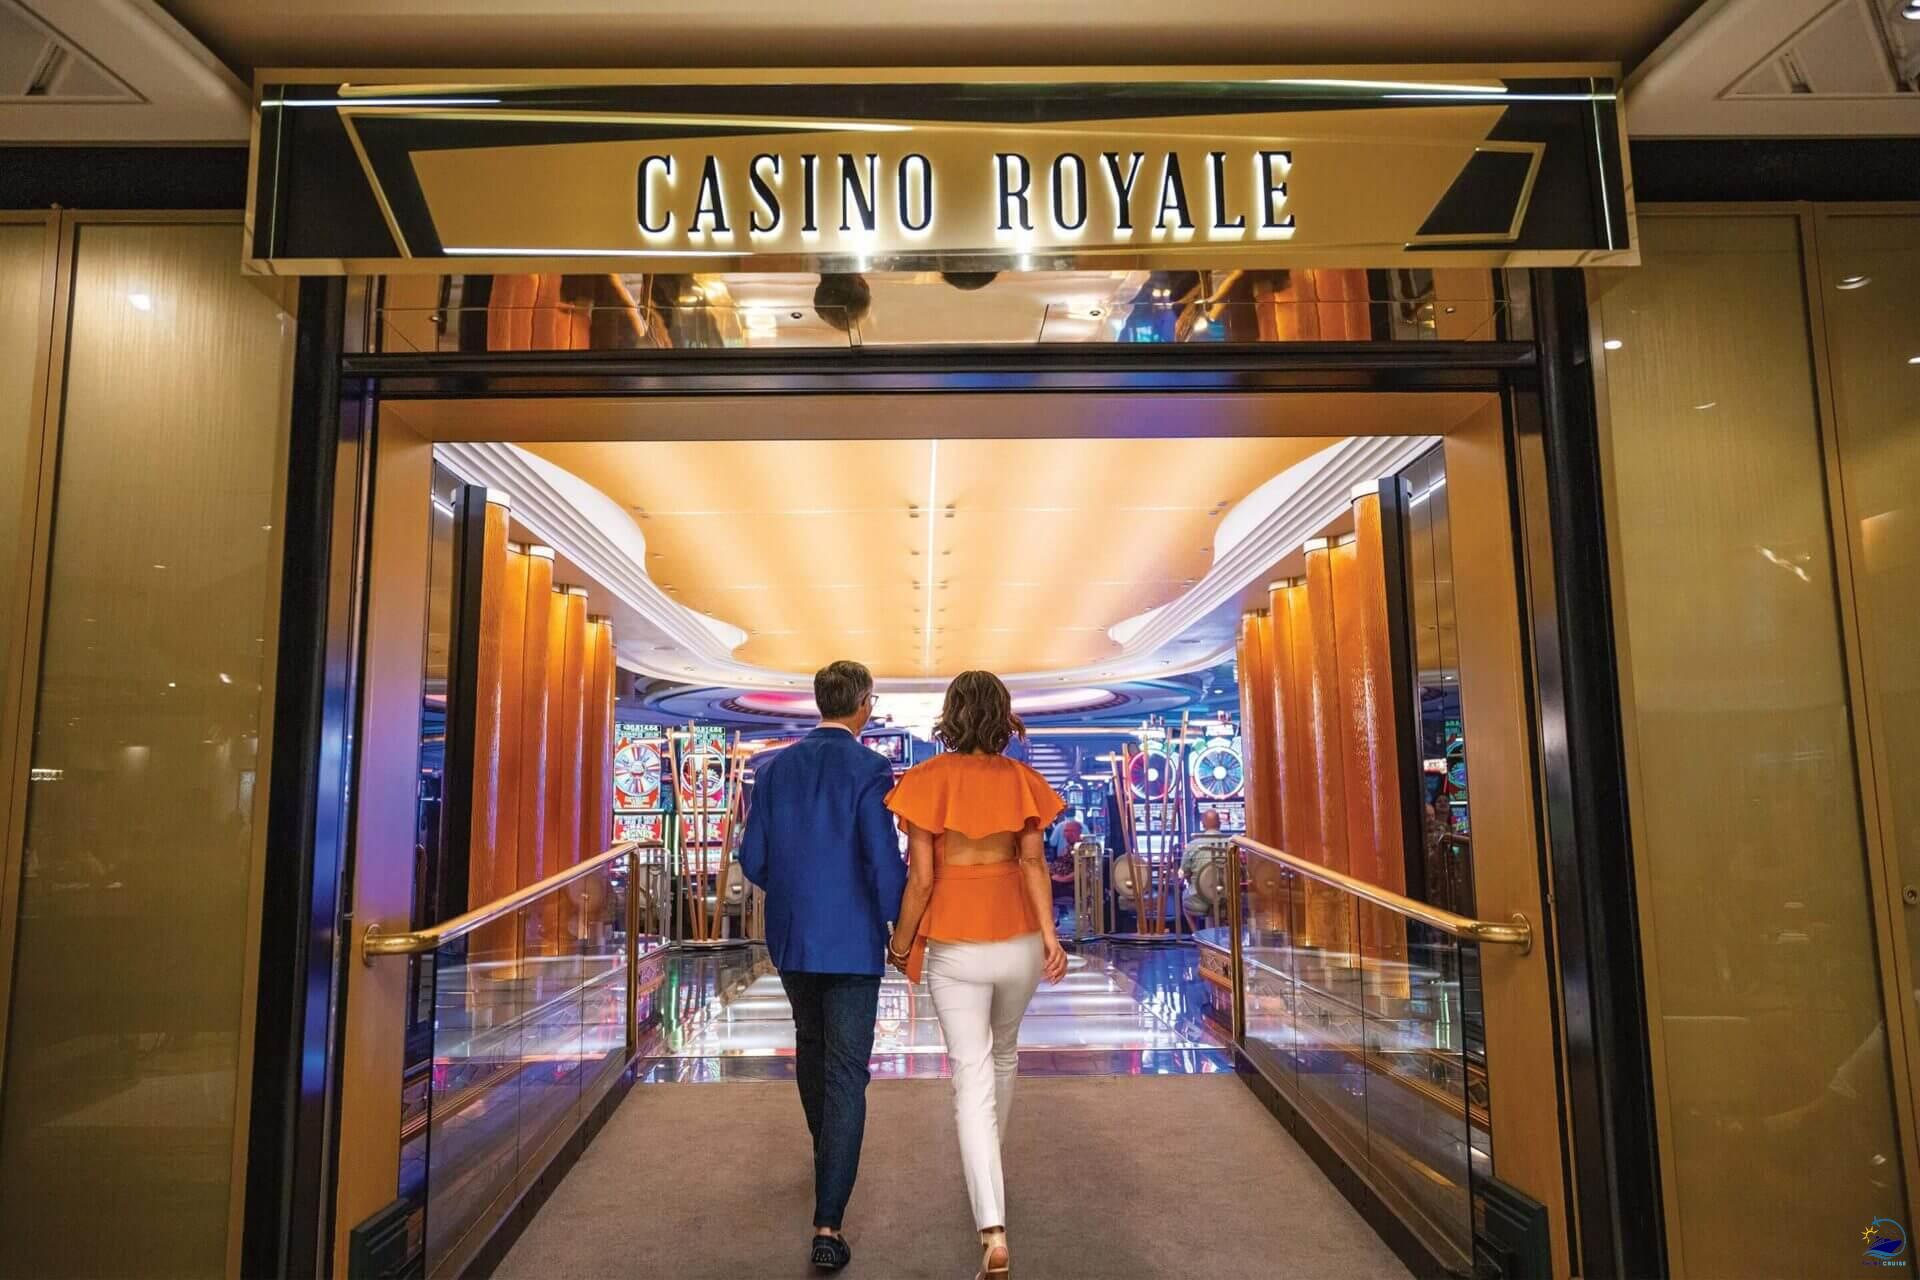 Royal Caribbean Casino Royale Offers